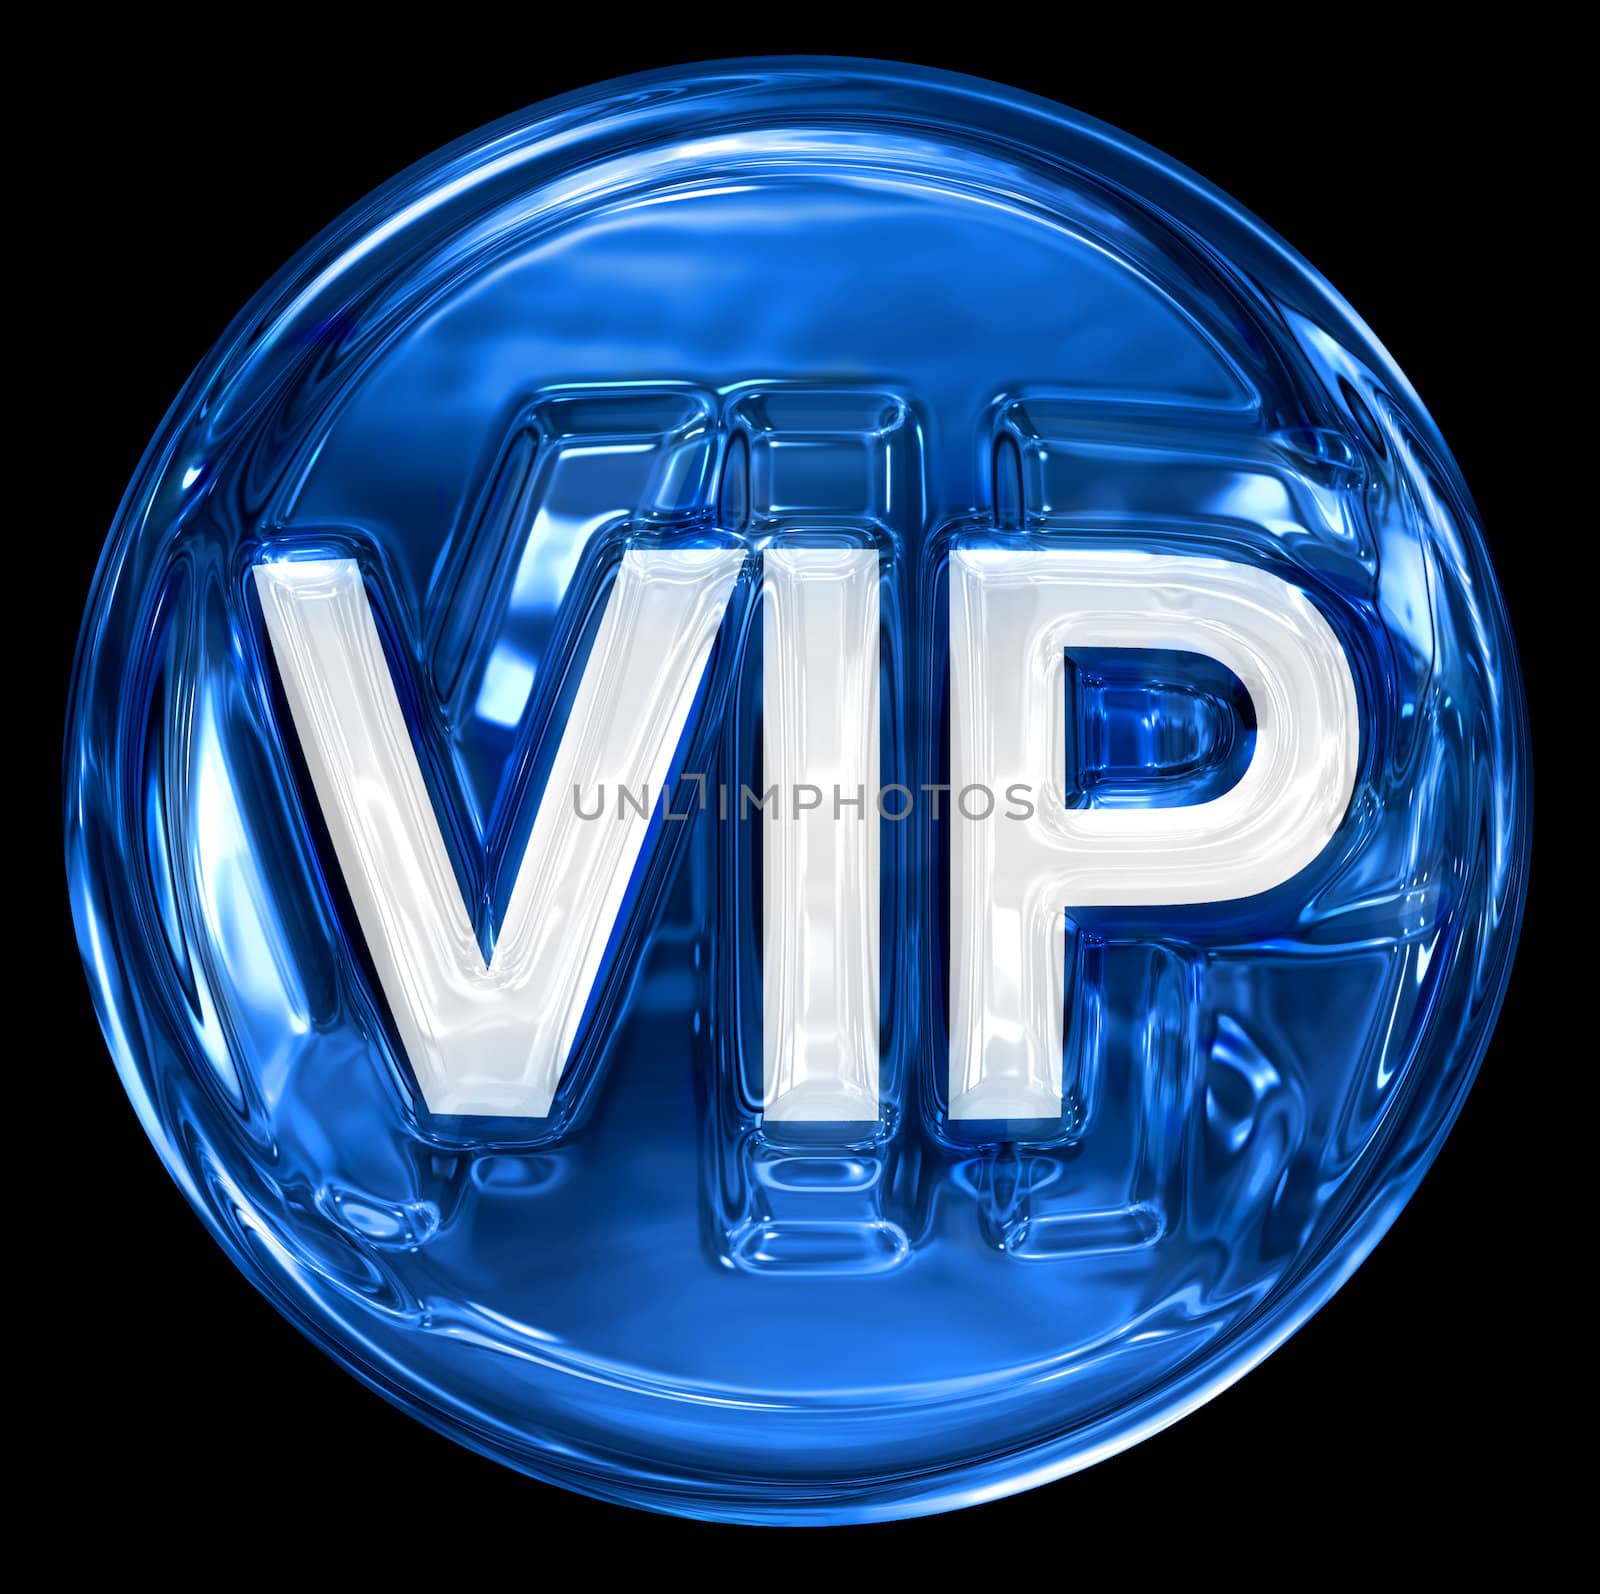 VIP icon blue, isolated on black background. by zeffss